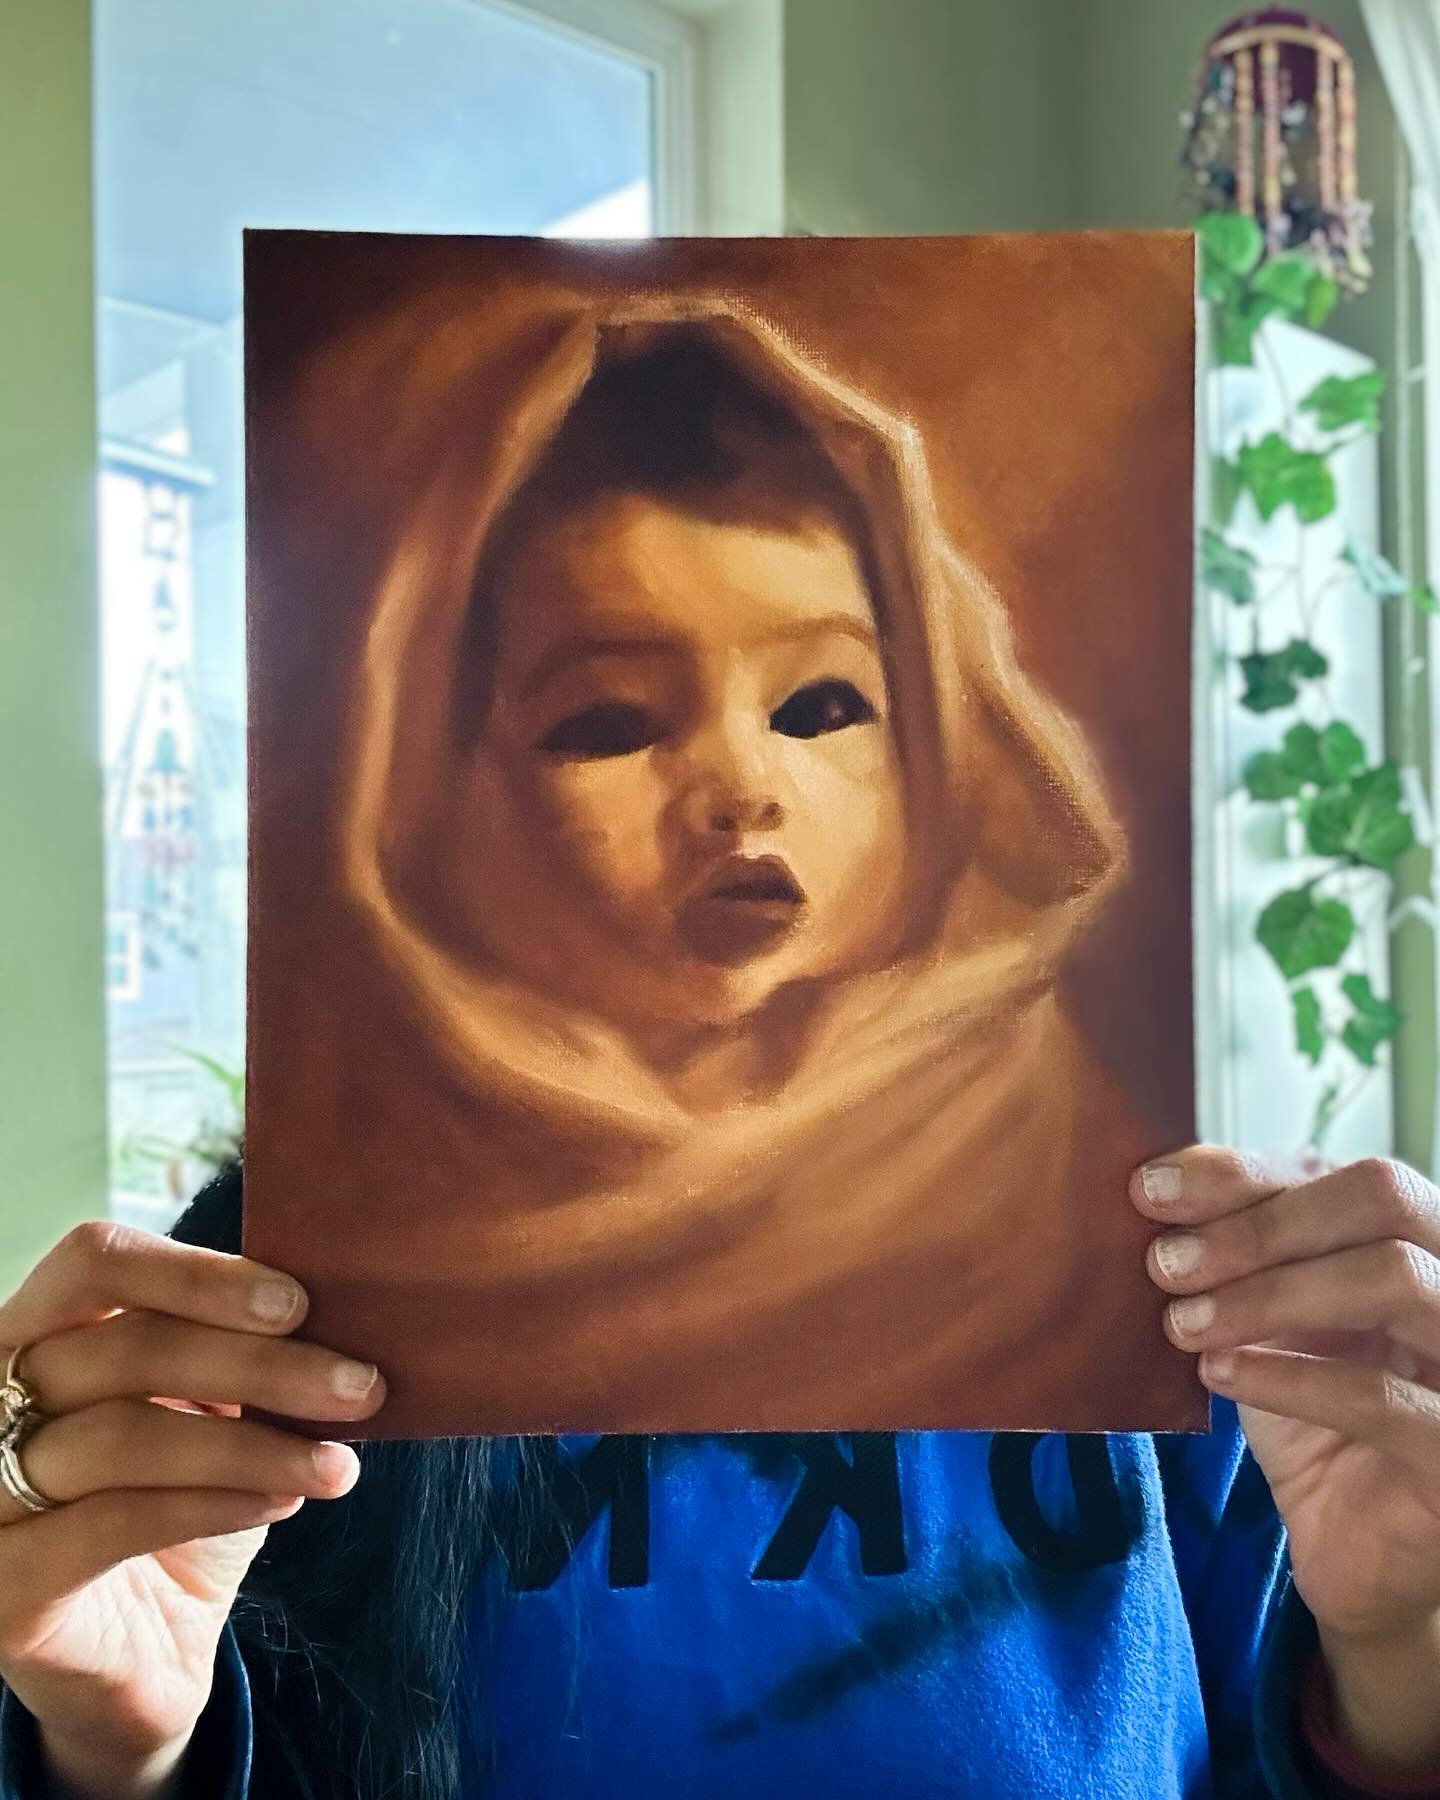 Cherishing Mother&rsquo;s Day with a special oil sketch of my little niece! 🧡🤎⁣
⁣
Today and everyday, I&rsquo;m grateful for the incredible ALL the mothers who shape my life 🥰⁣
⁣
Your love and care empower me!⁣
Wish you all a joyful Mother&rsquo;s